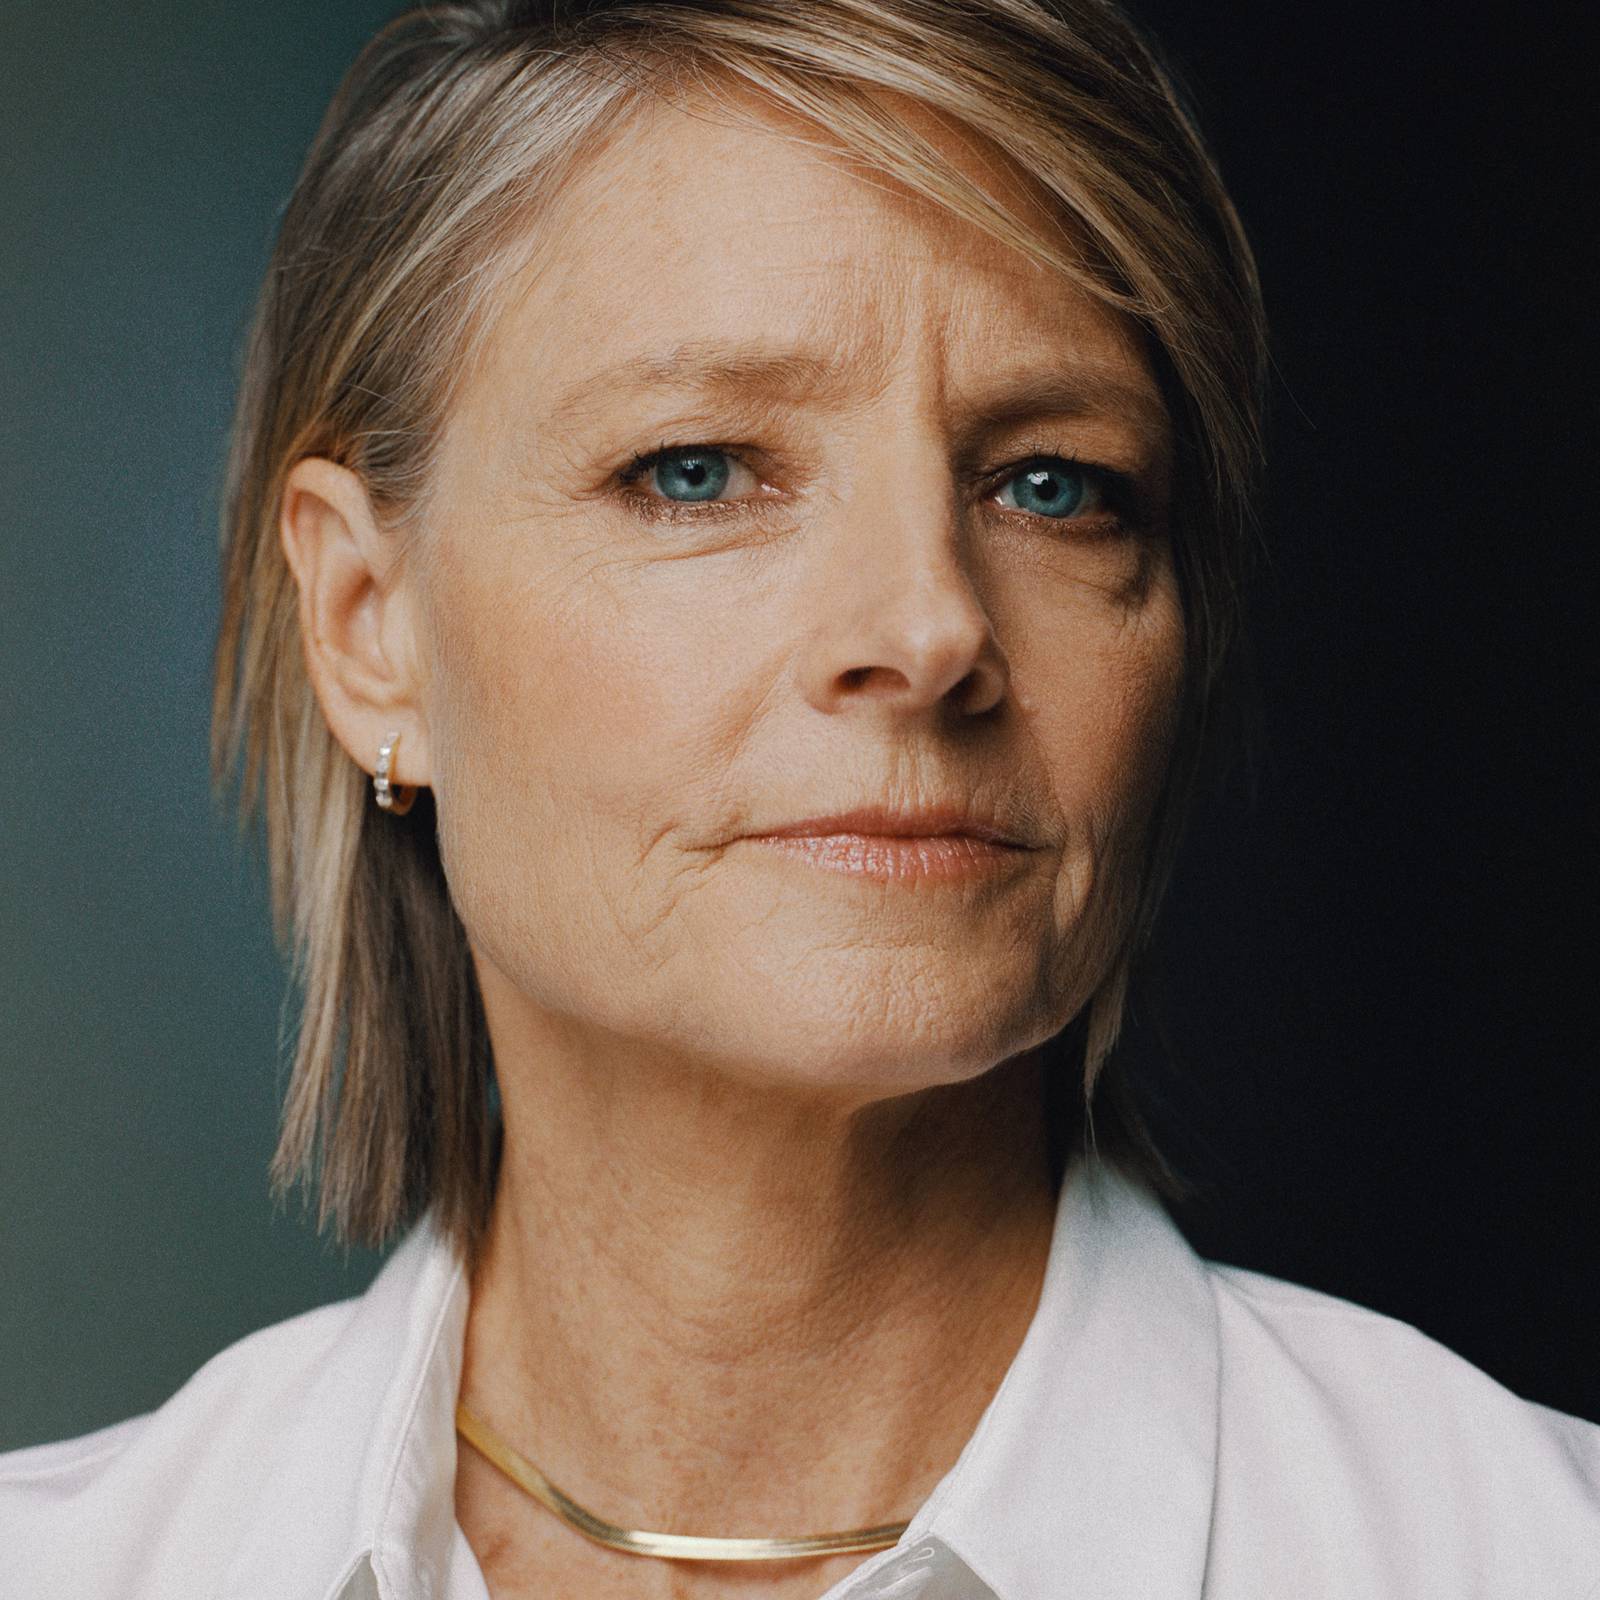 Jodie Foster on difficulties of being a young actor: 'We didn't